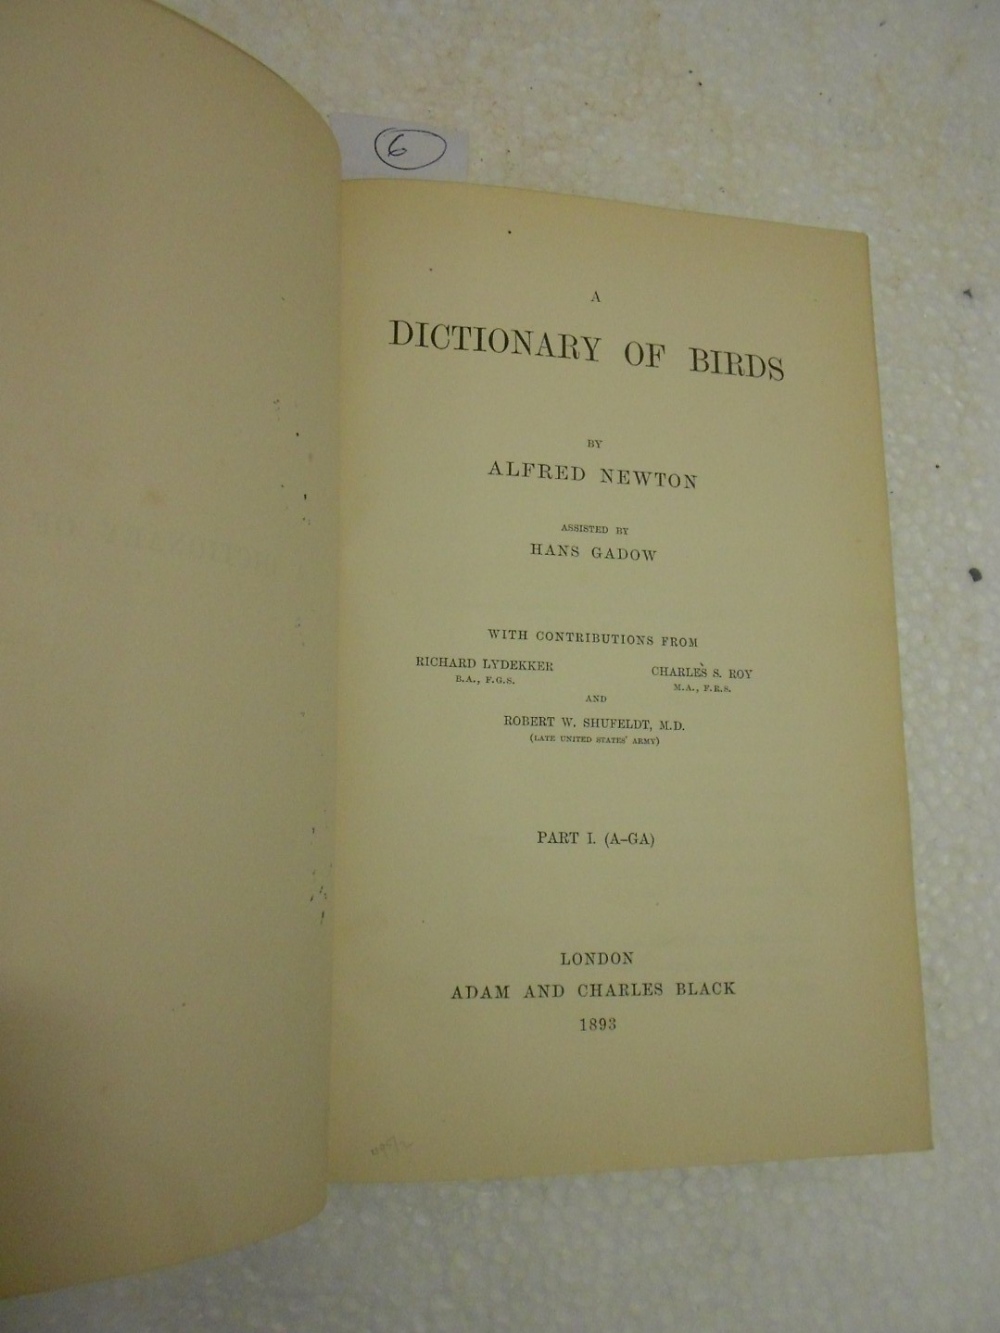 NEWTON (Alfred) A Dictionary of Birds, 1893-94, four vols in two, t.e.g., half morocco by - Image 3 of 3